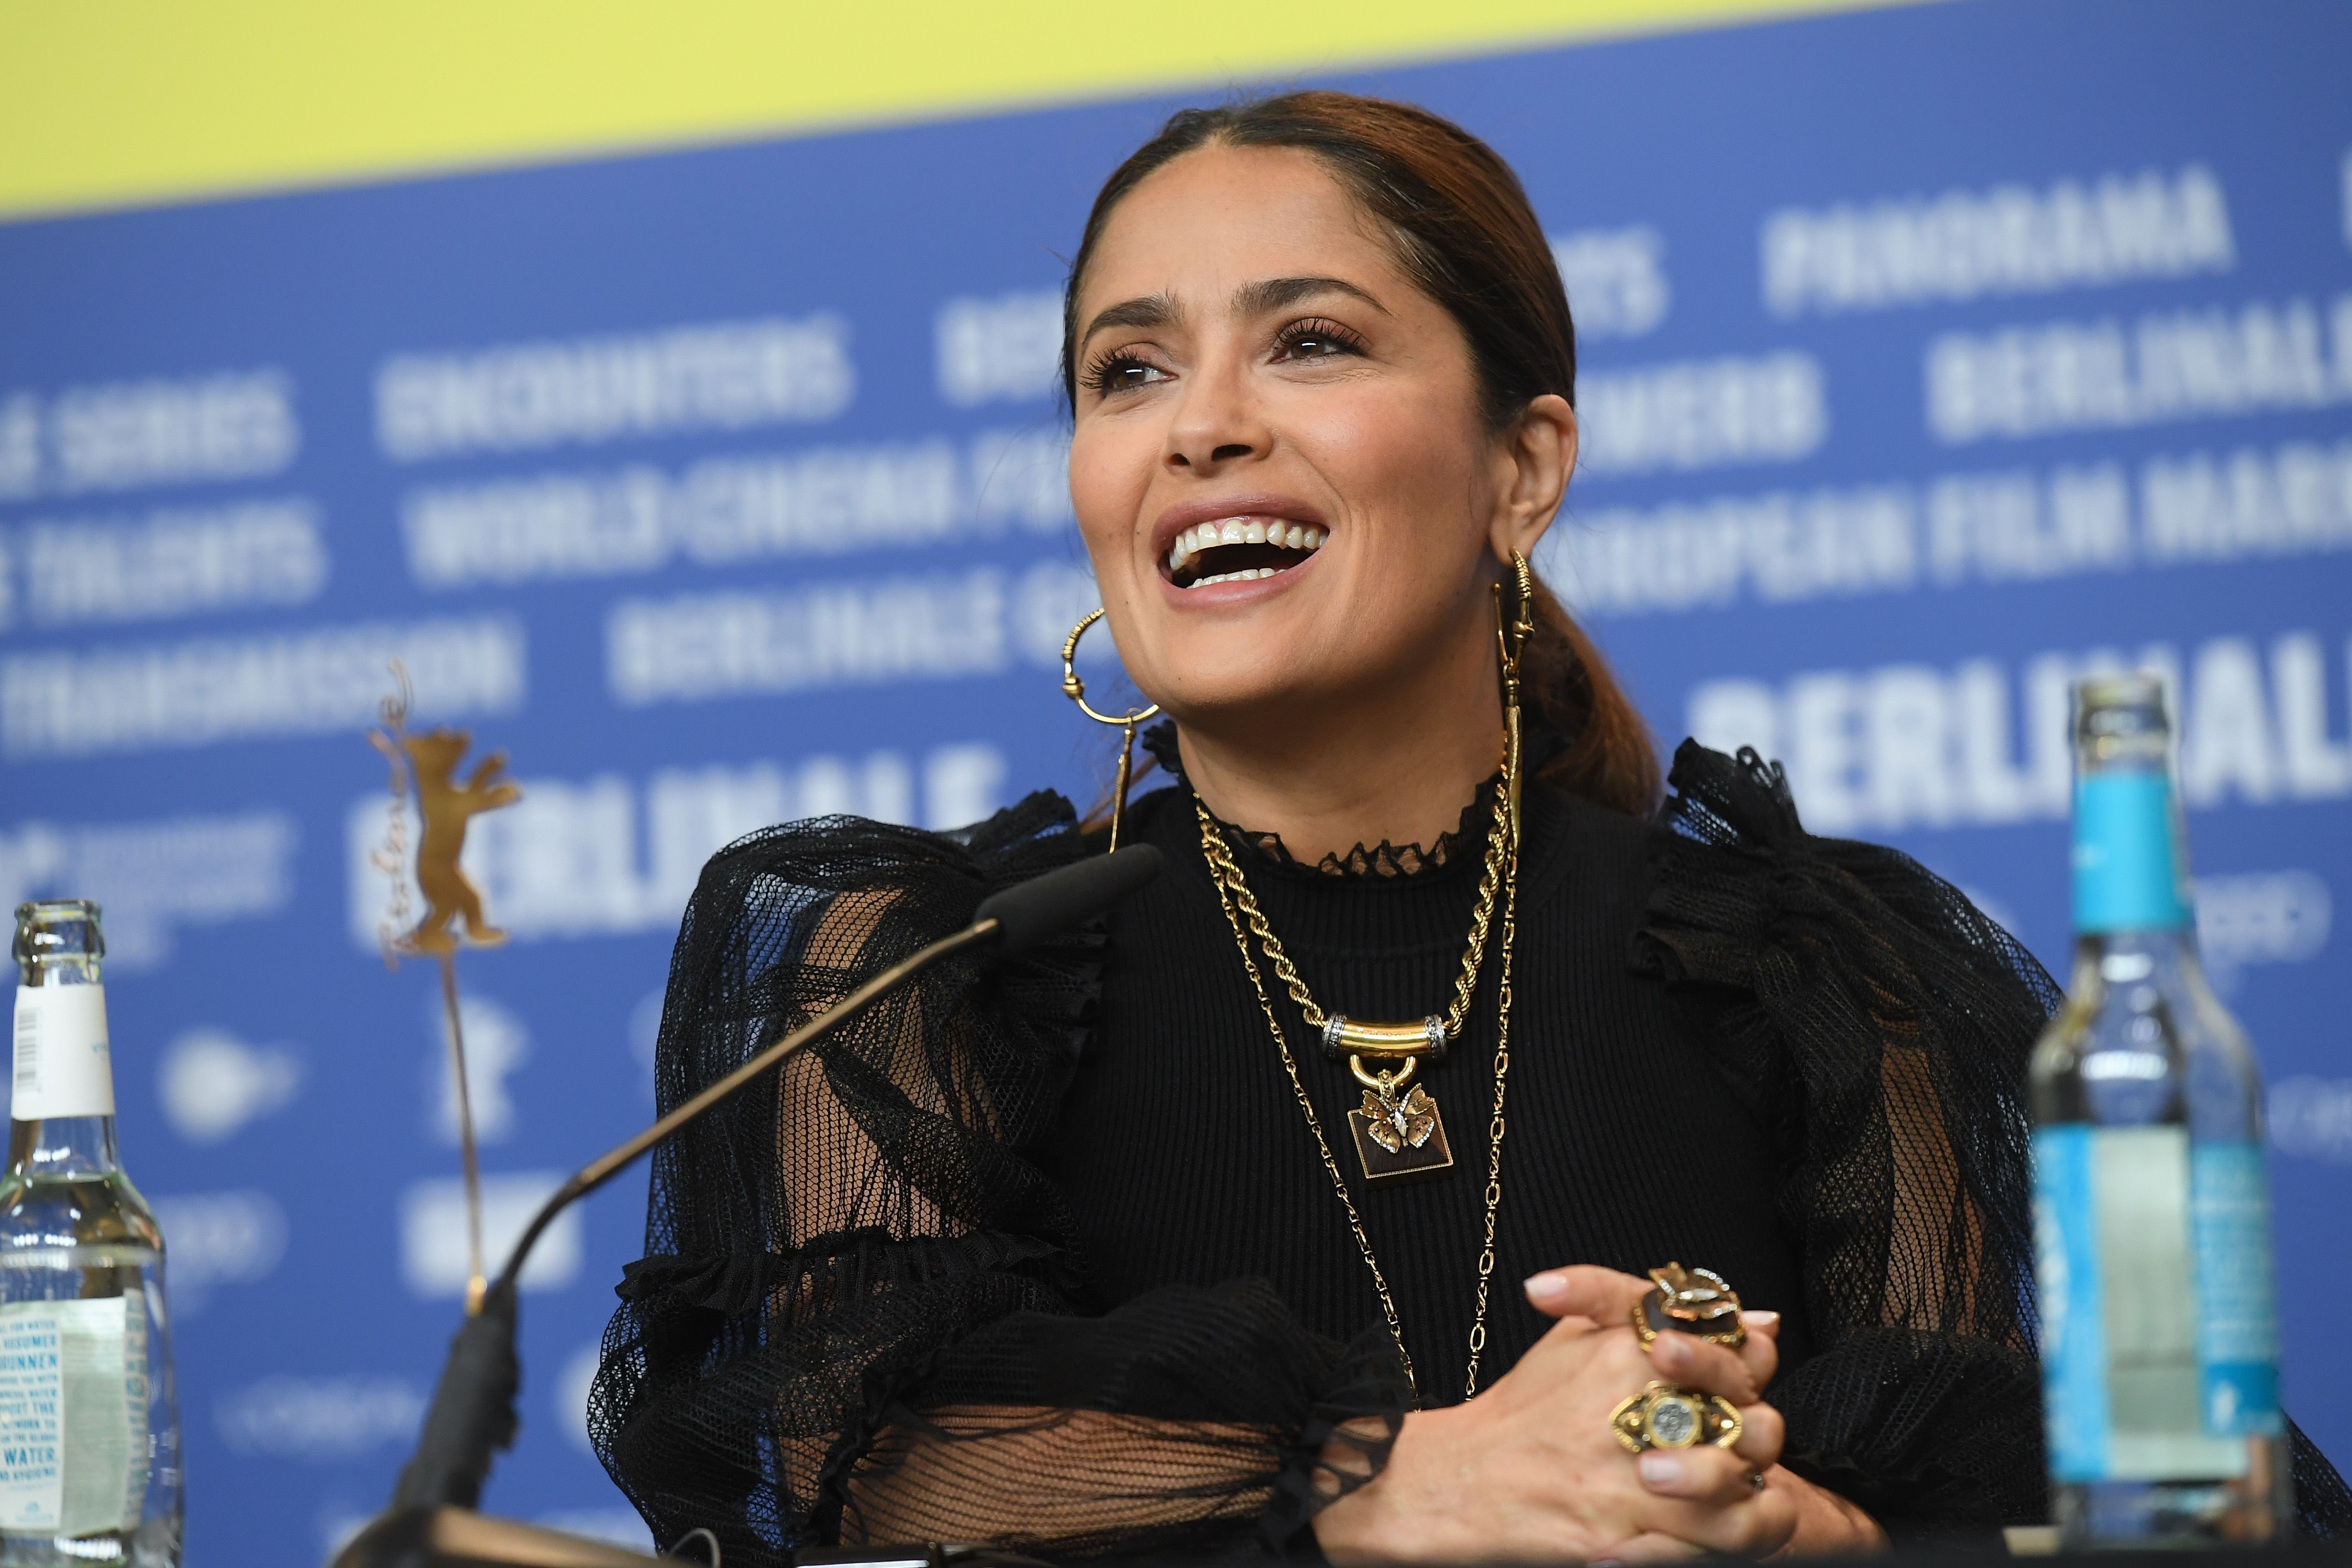 Salma Hayek at the "The Roads Not Taken" press conference during the 70th Berlinale International Film Festival Berlin at Grand Hyatt Hotel on February 26, 2020 | Photo: Getty Images